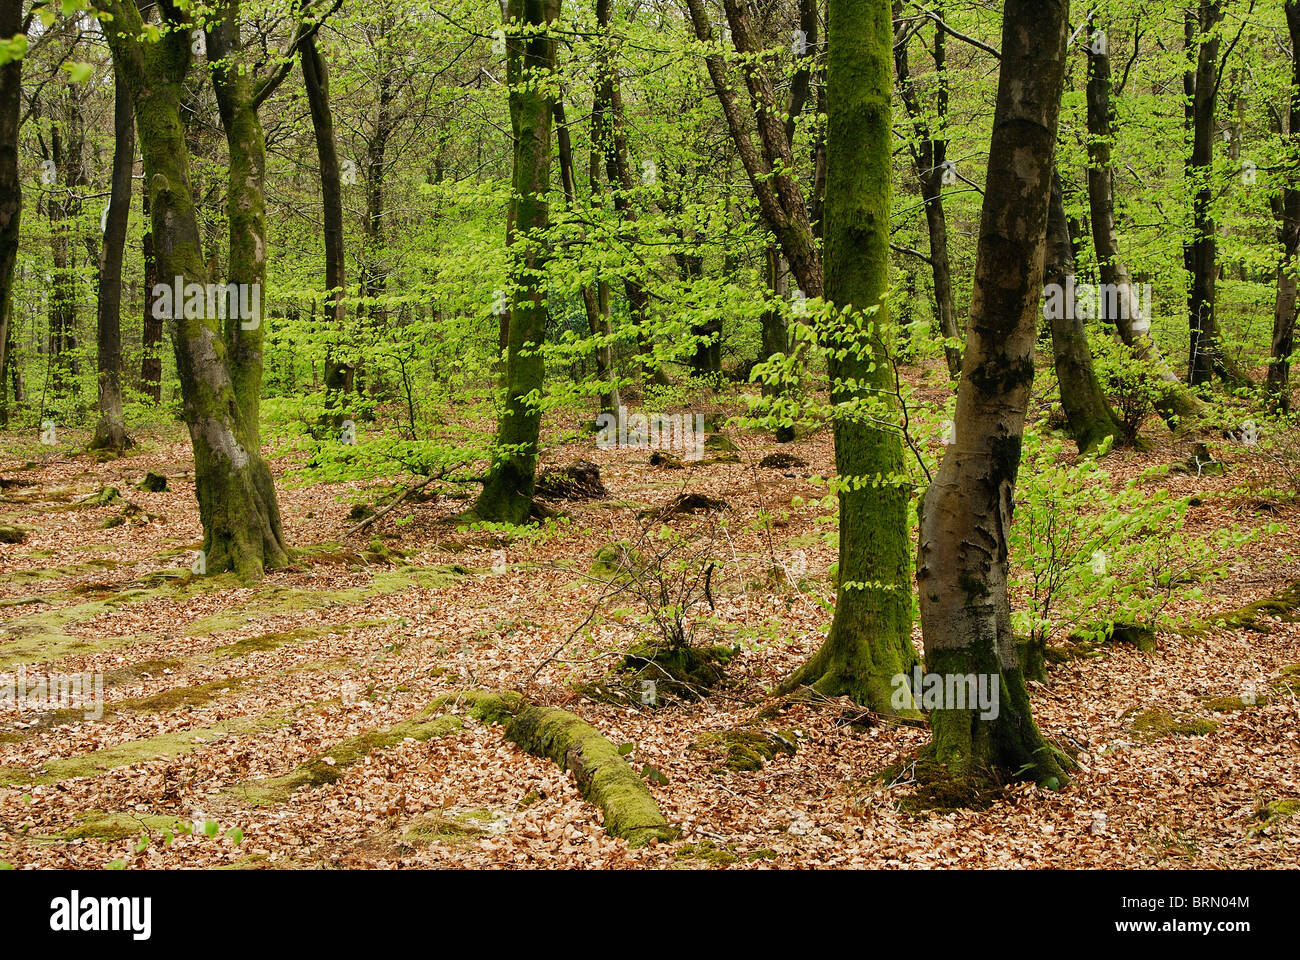 A beech woodland in Somerset, Beacon Hill Wood, in spring.  UK April 2010 Stock Photo